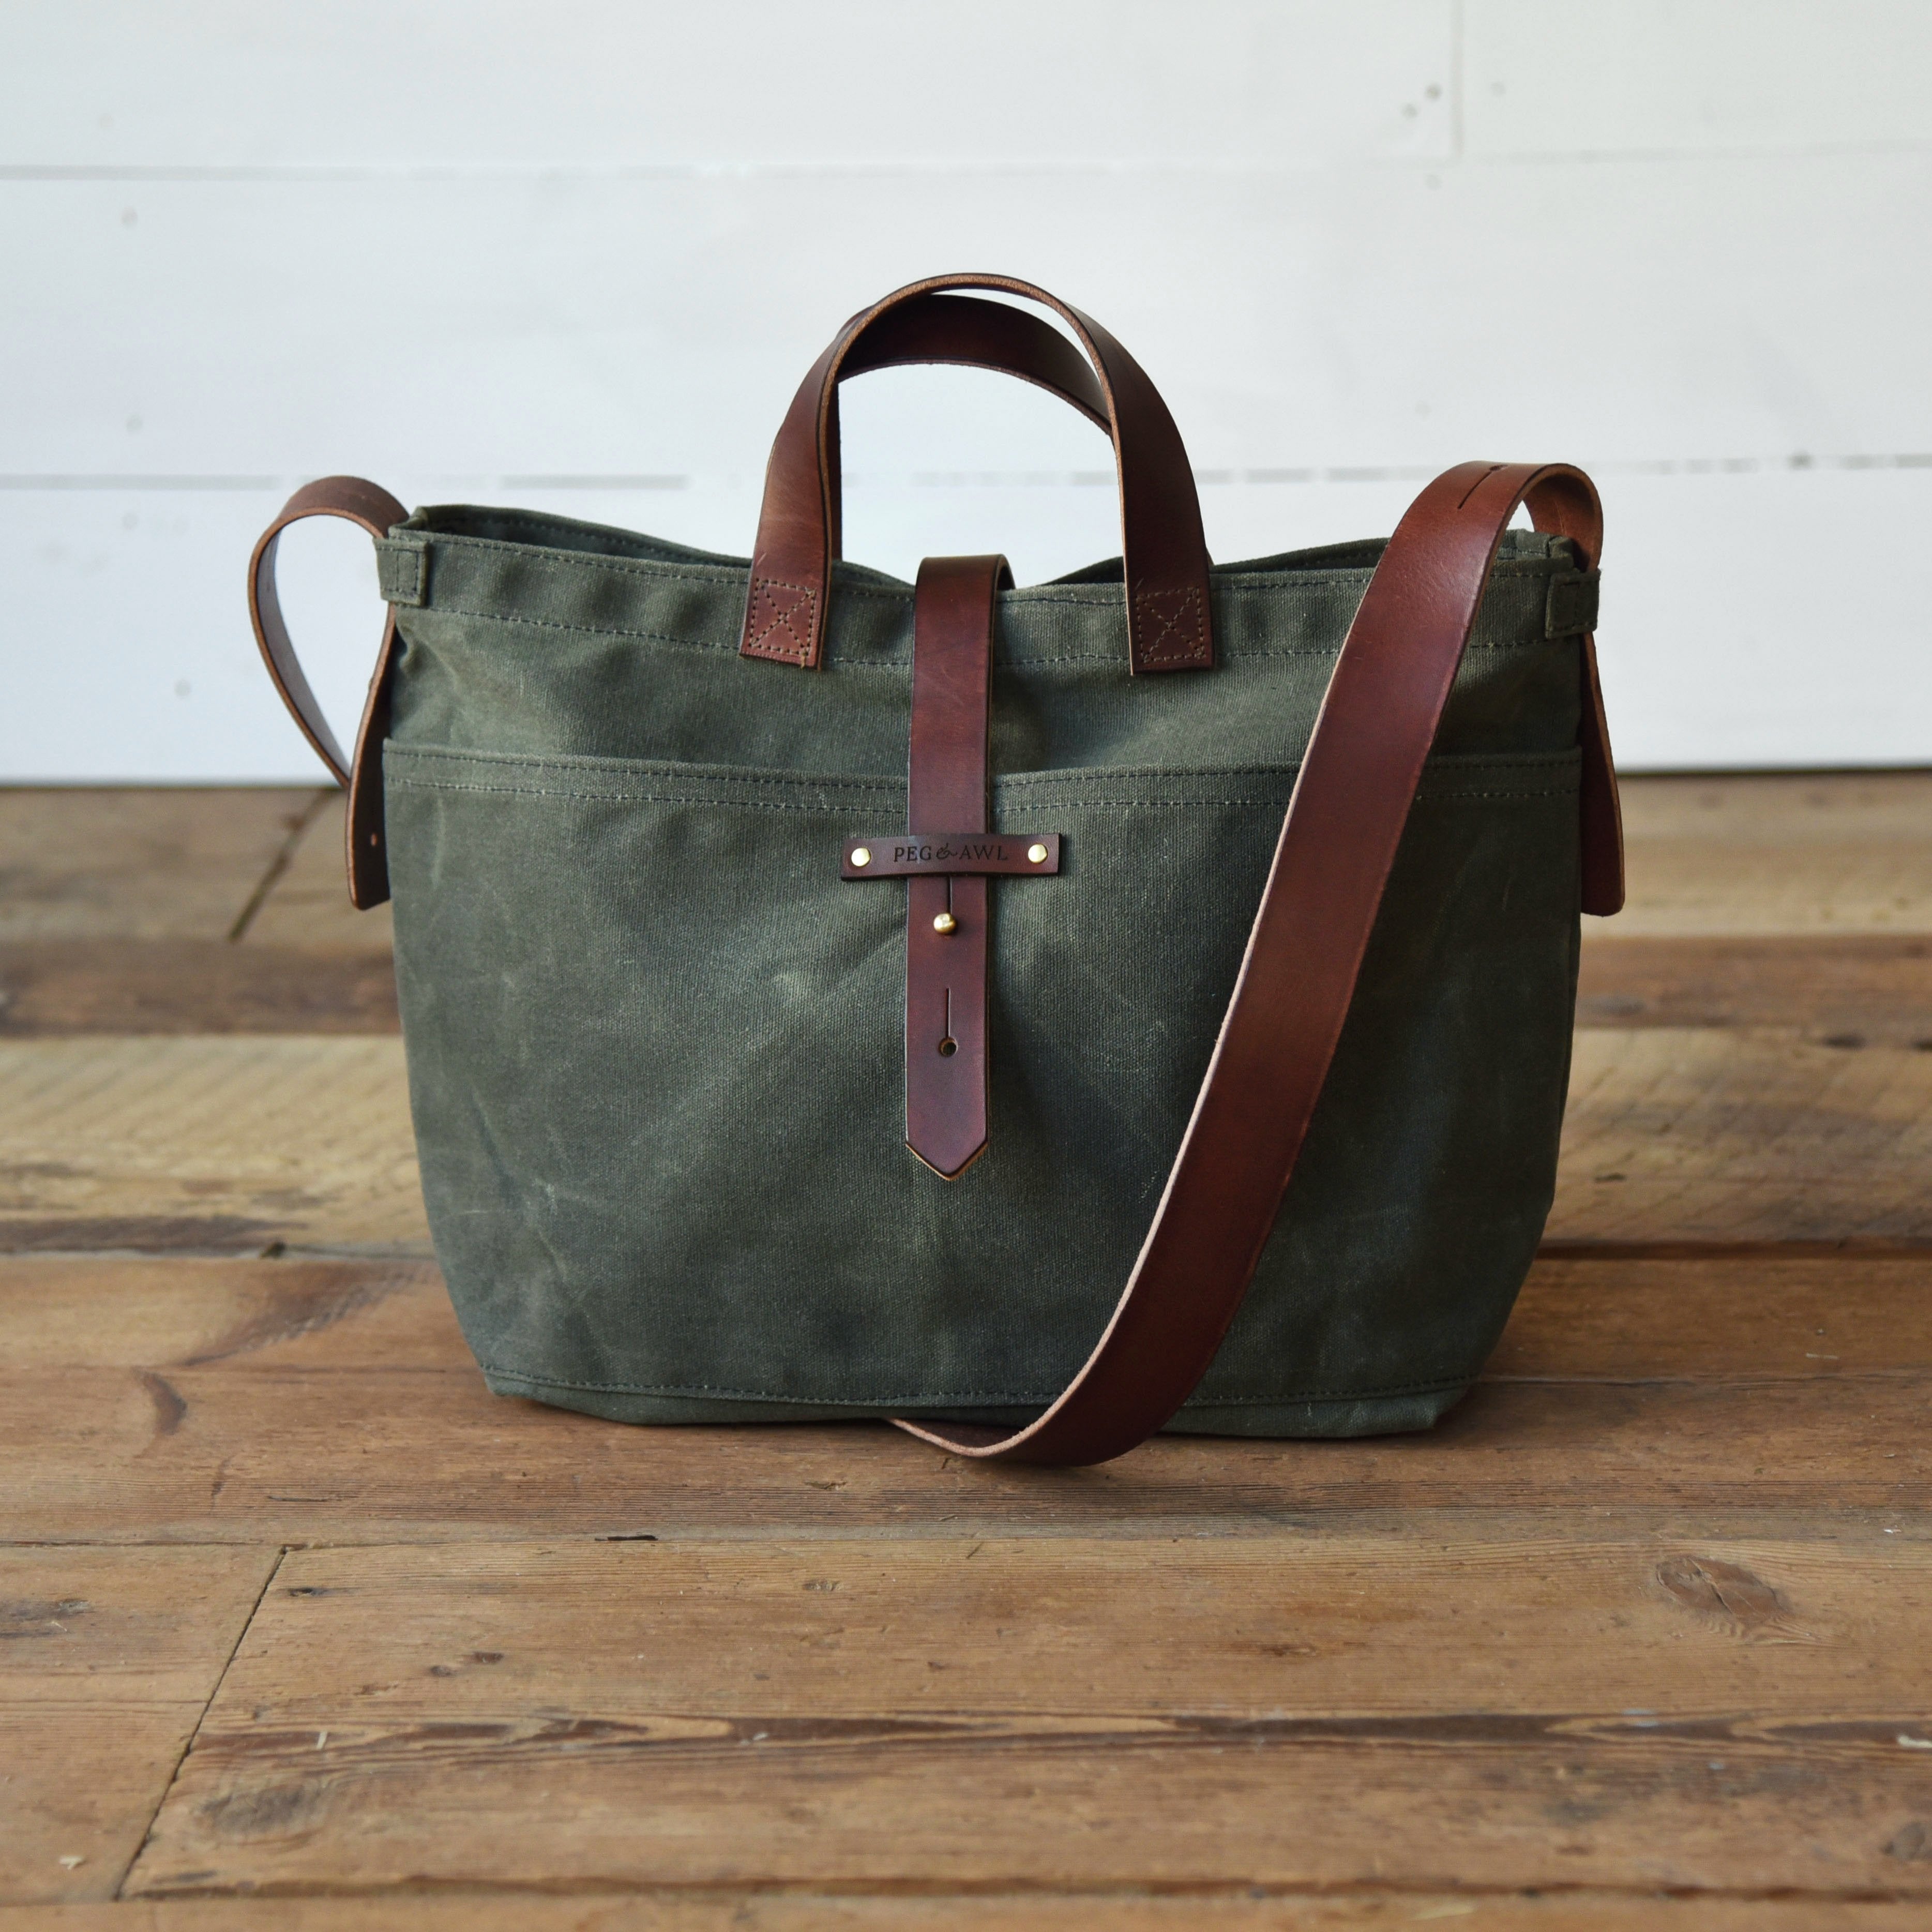 Peg and Awl Waxed Canvas Tote - Moss/Zipper - NOMADO Store